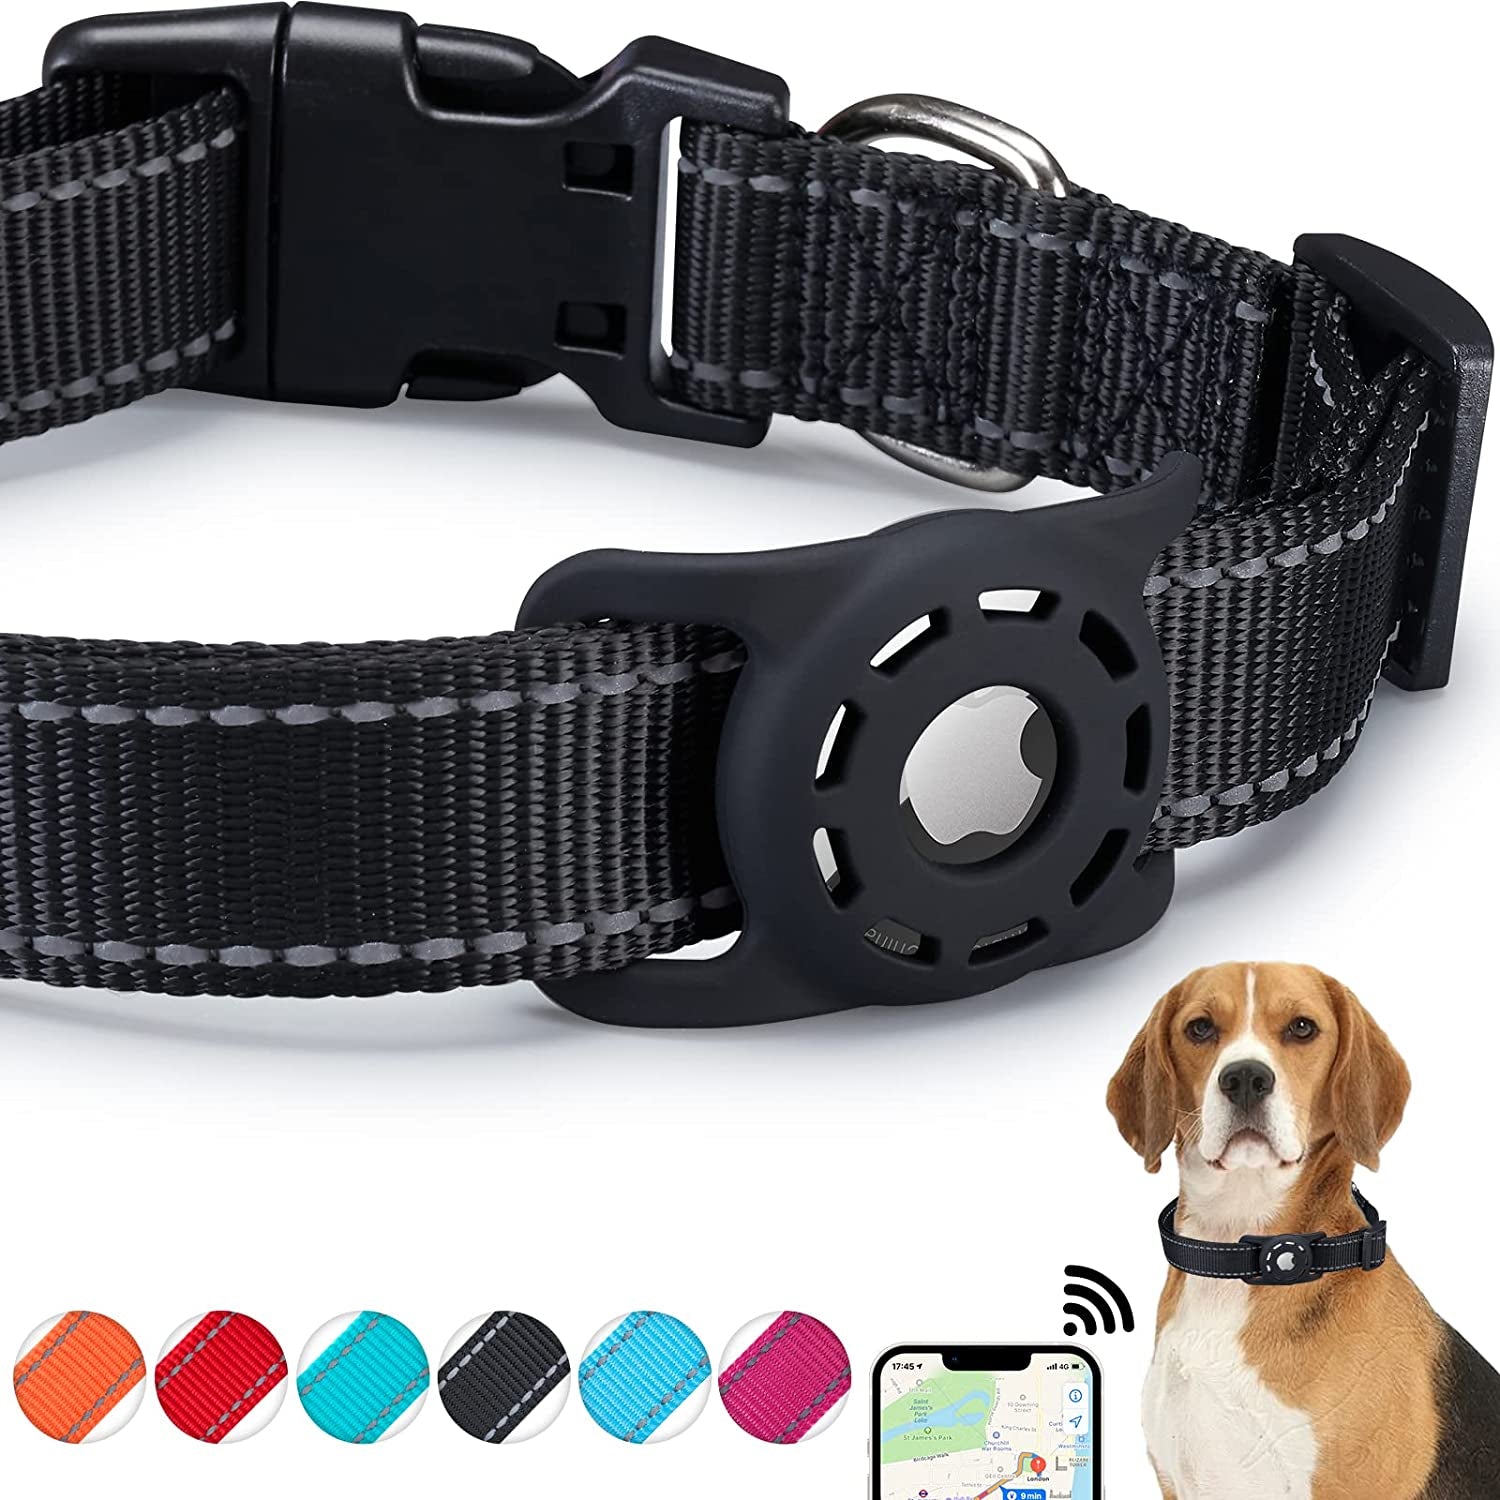 Apple AirTag holder for silicone dog collar